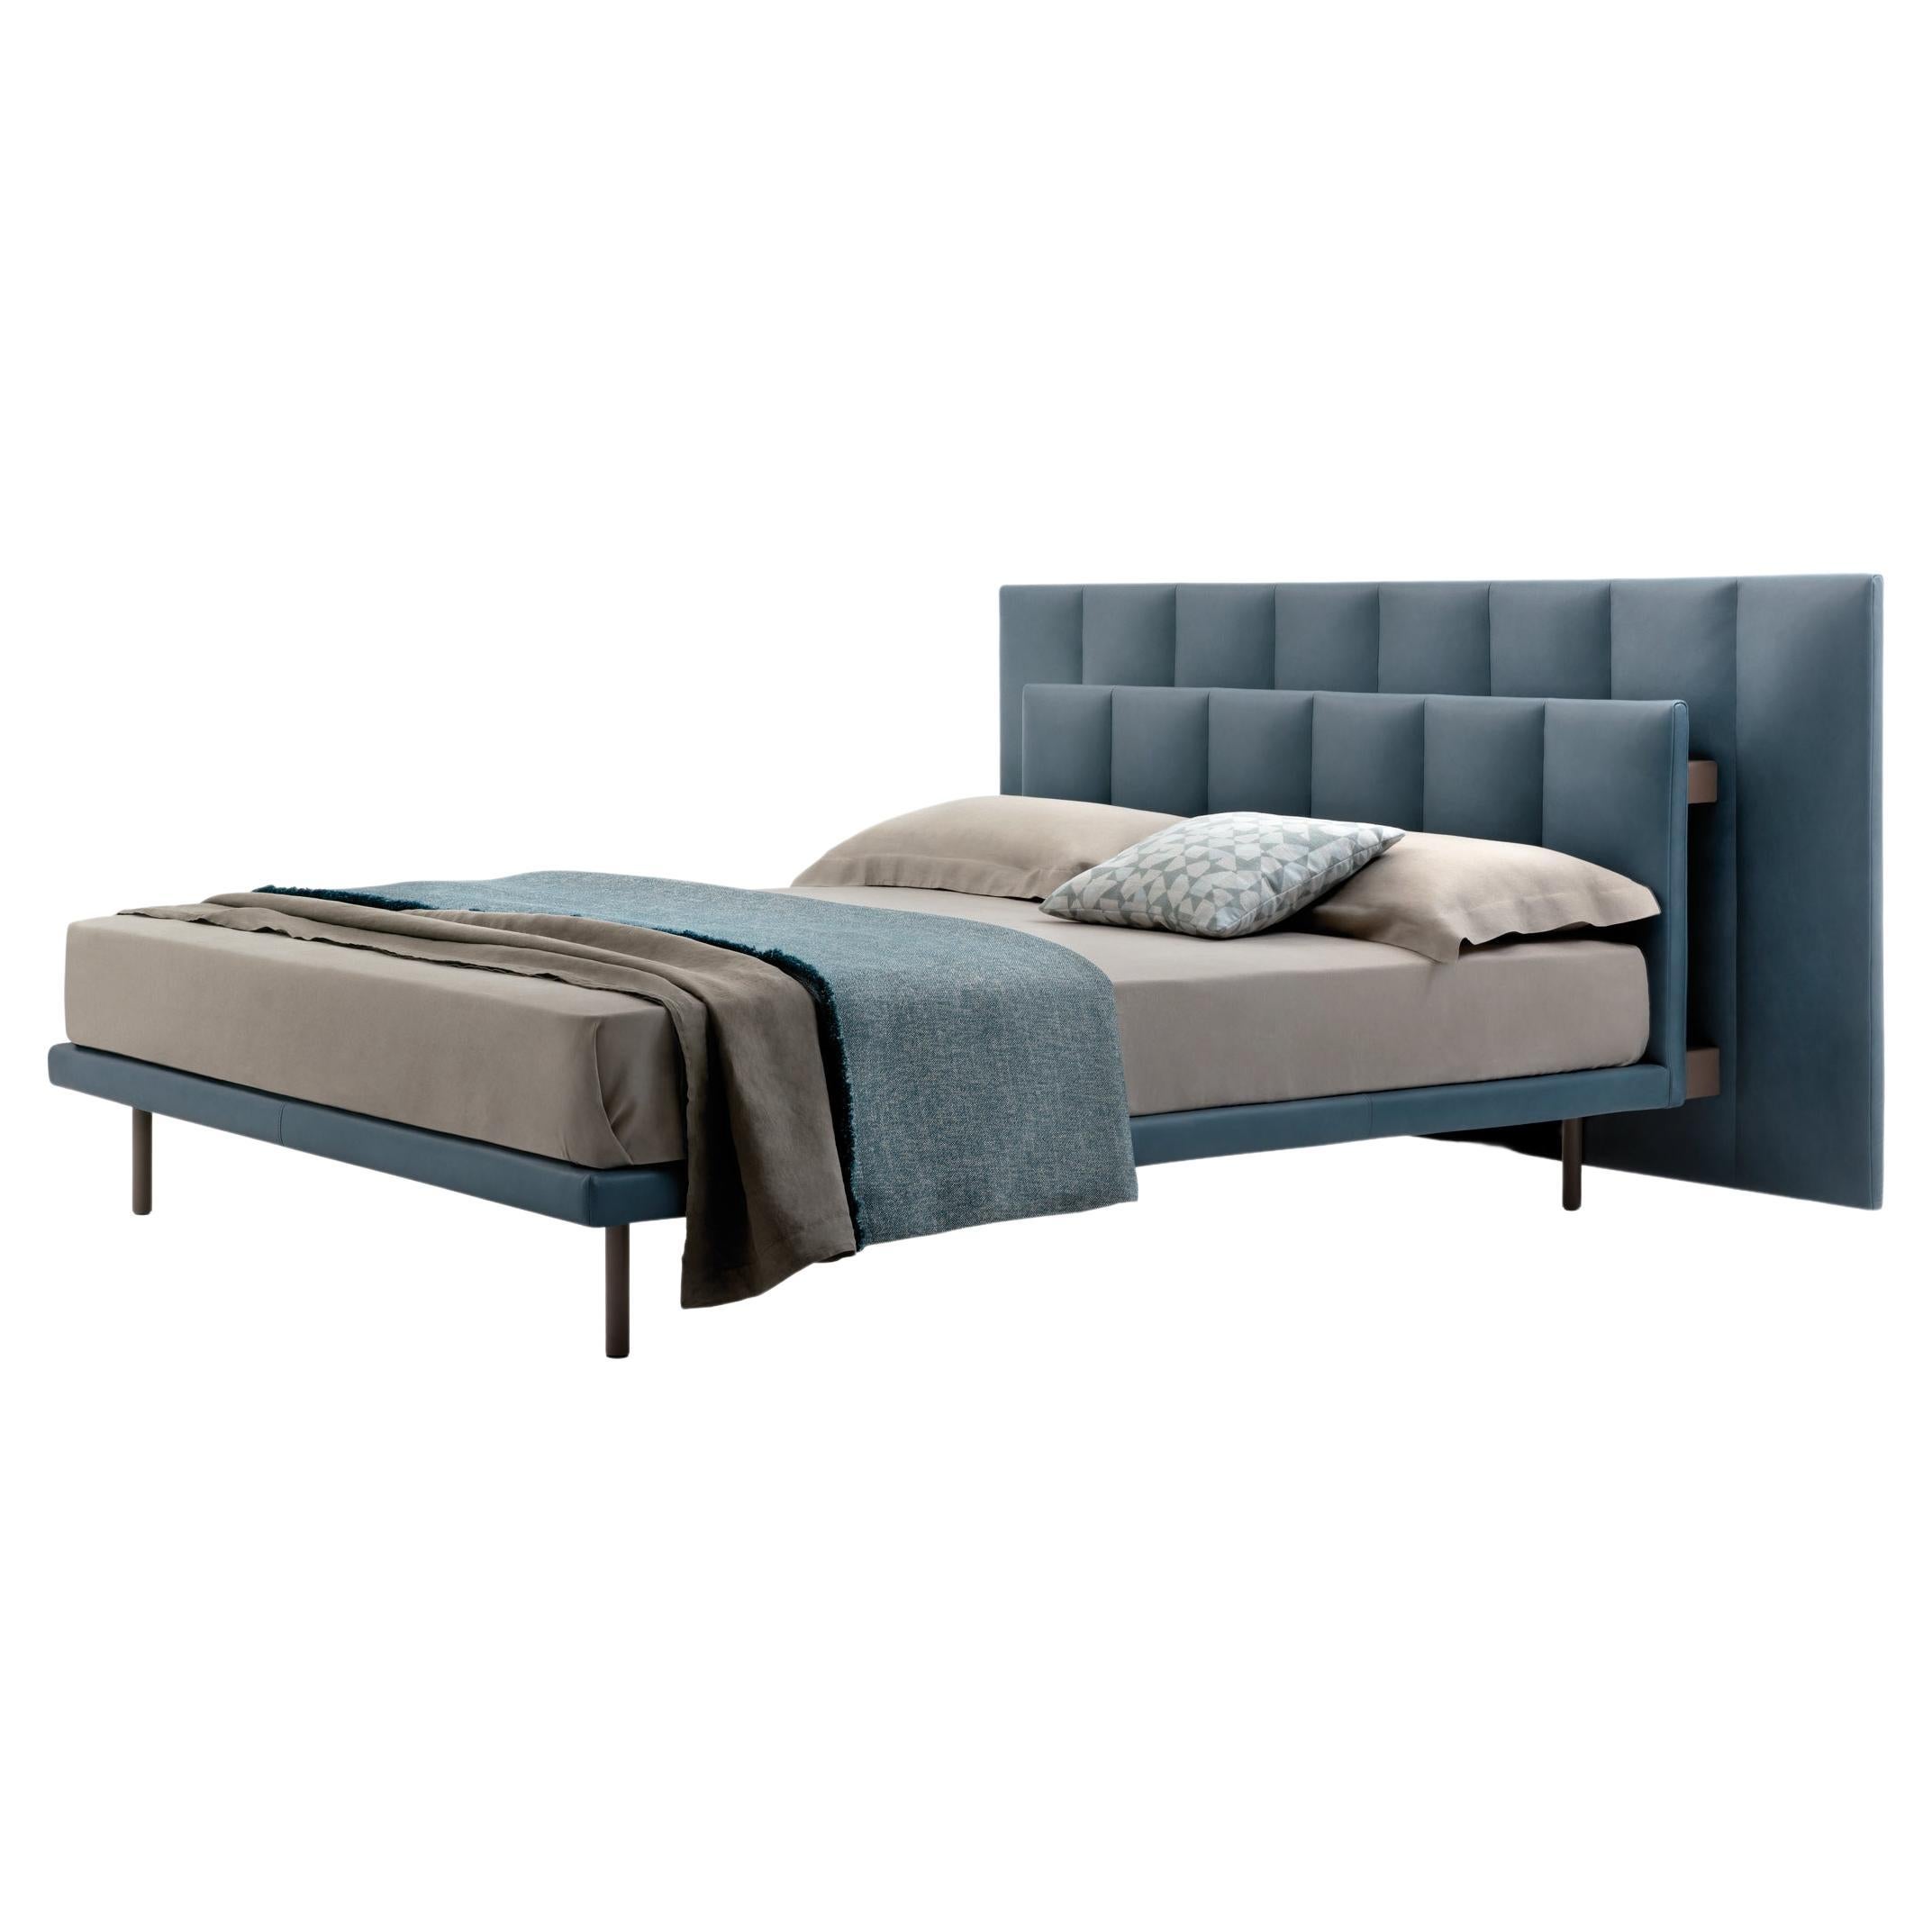 Zanotta Large Grangala Bed with Separate Springing in Grey Upholstery For Sale